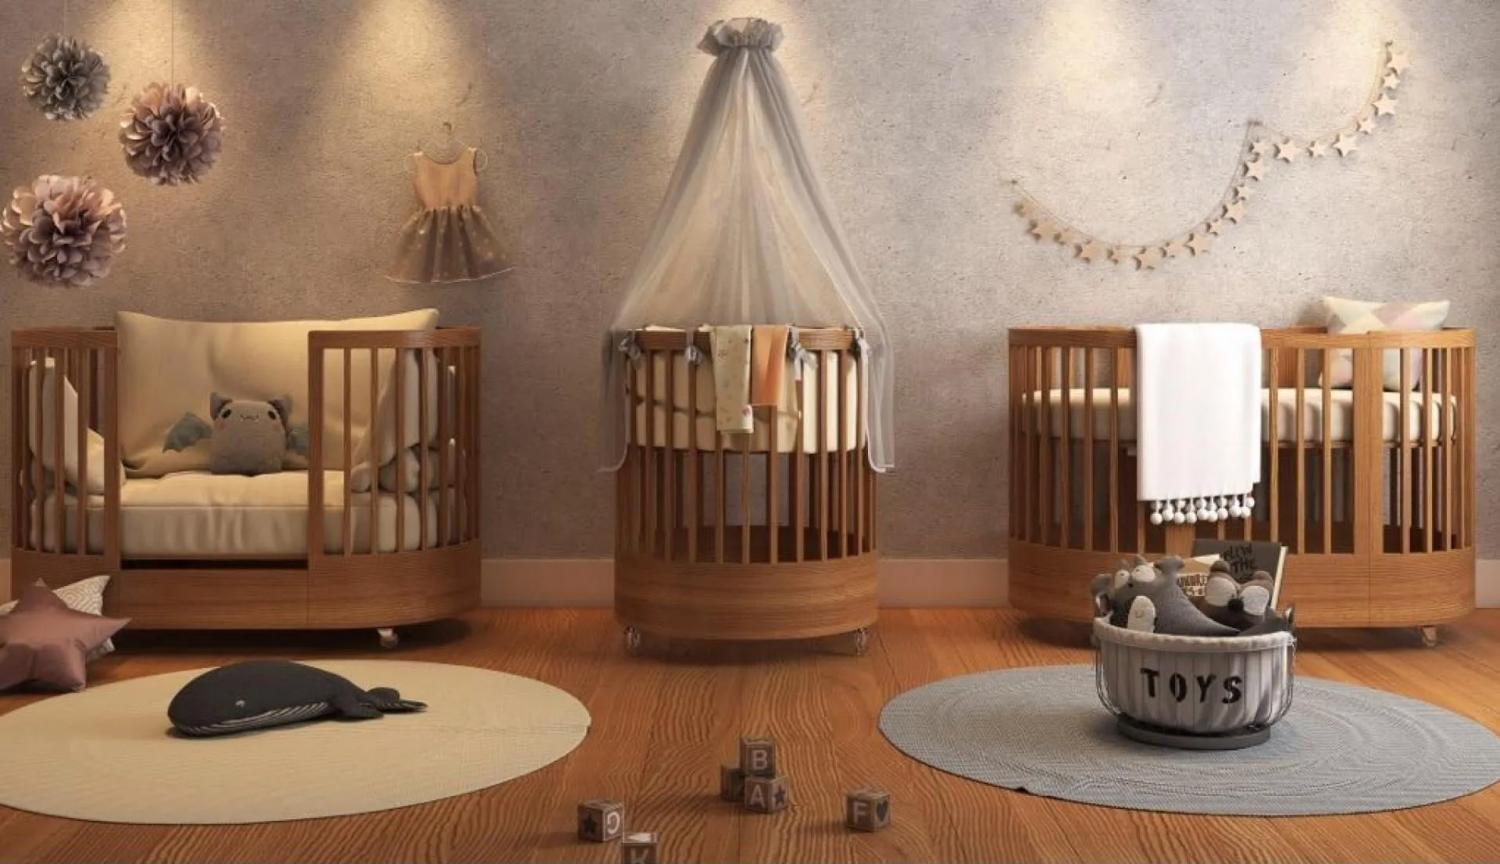 Get This 4-in-1 Convertible Crib, Bassinet, And Toddler Bed In One Convenient Package